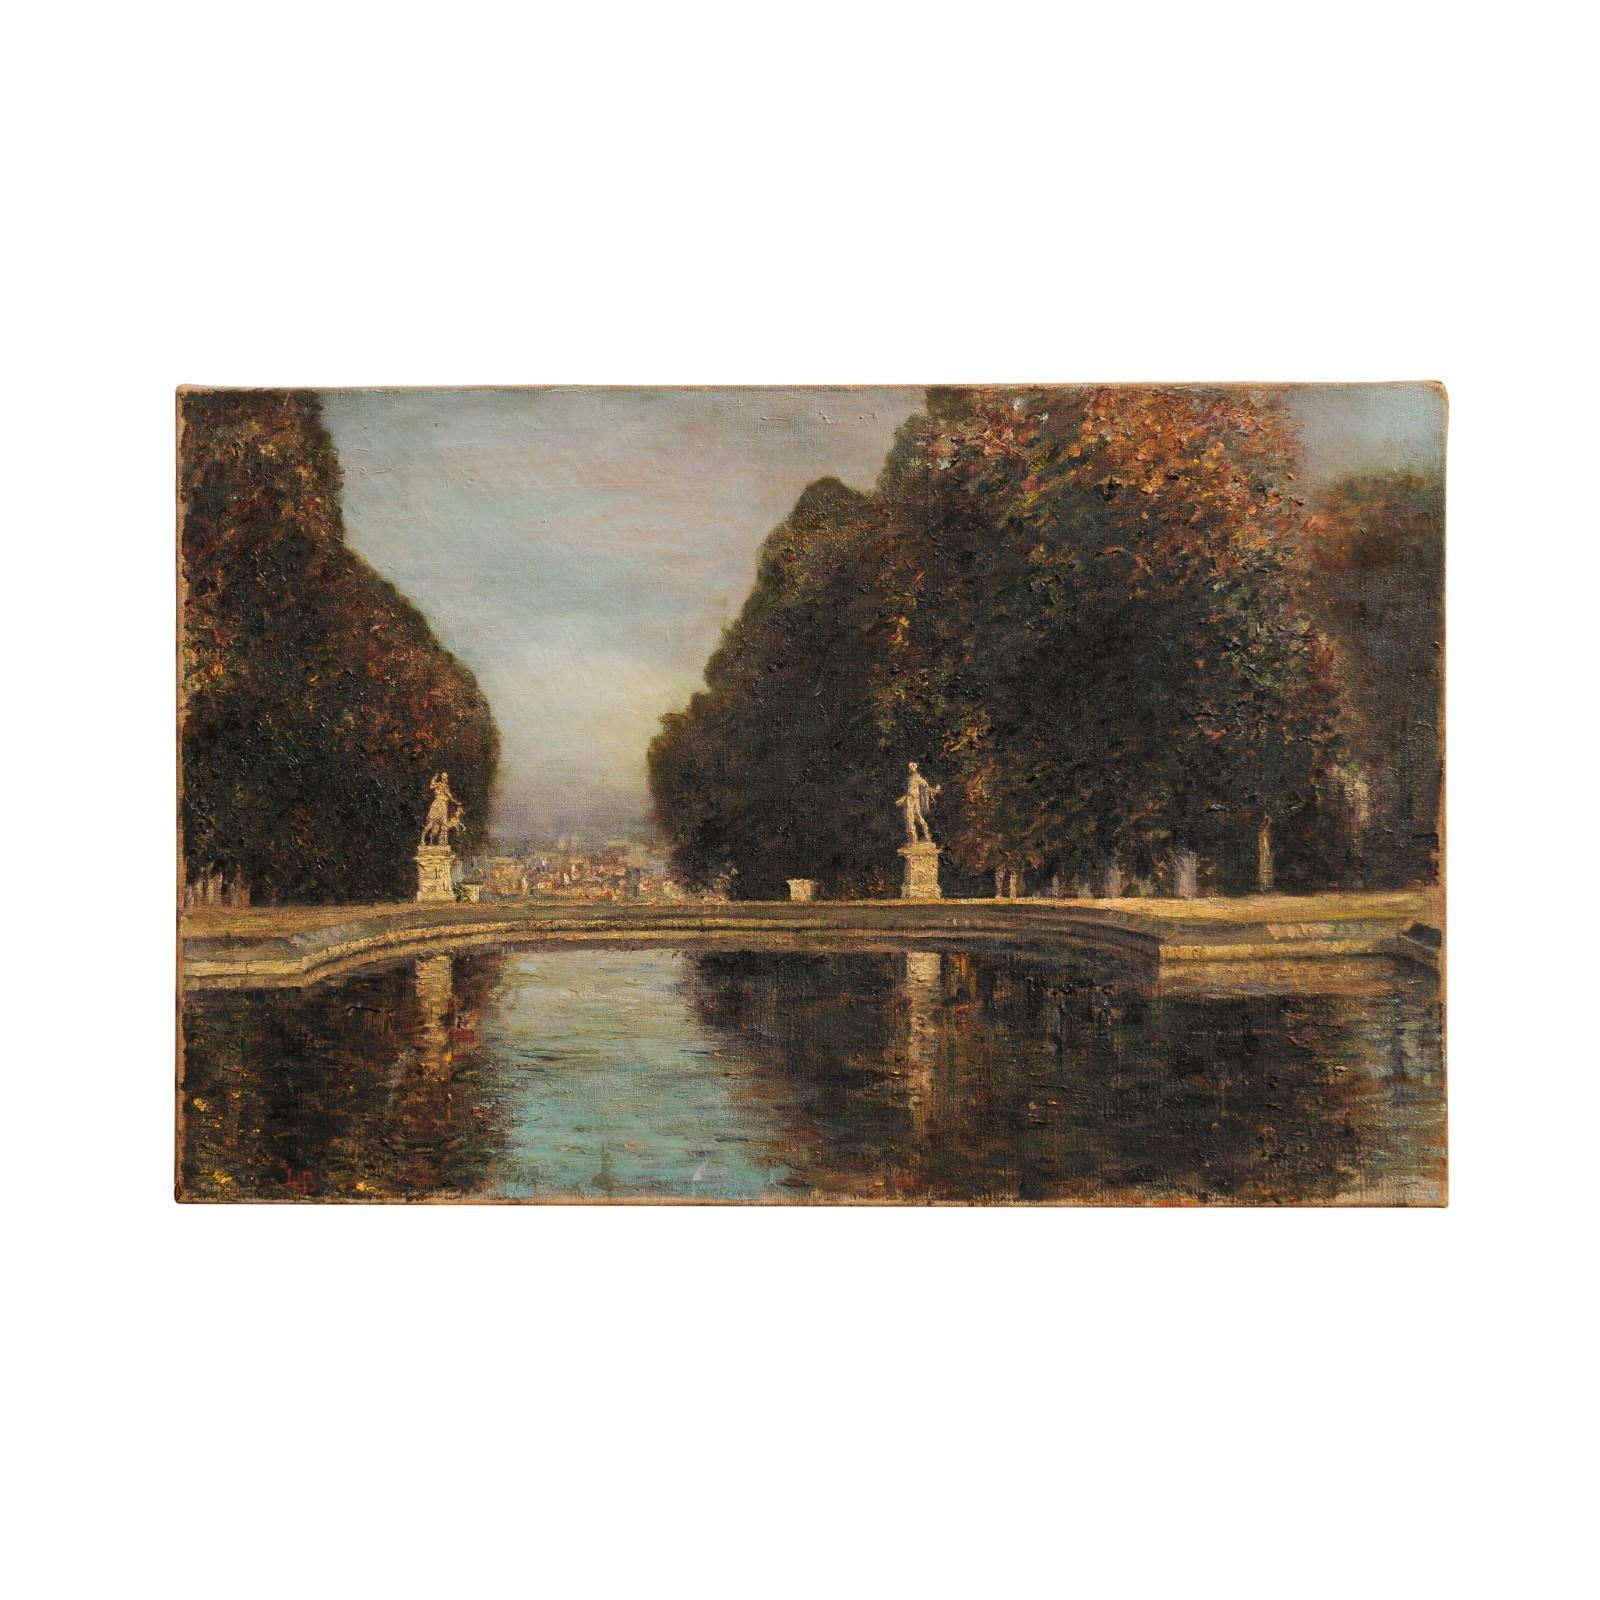 A French oil on canvas unframed painting from the 20th century depicting the Park of Saint Cloud with the marble statues of Apollo and Diana. Created in France during the 20th century, this oil on canvas painting depicts the romantic view of the